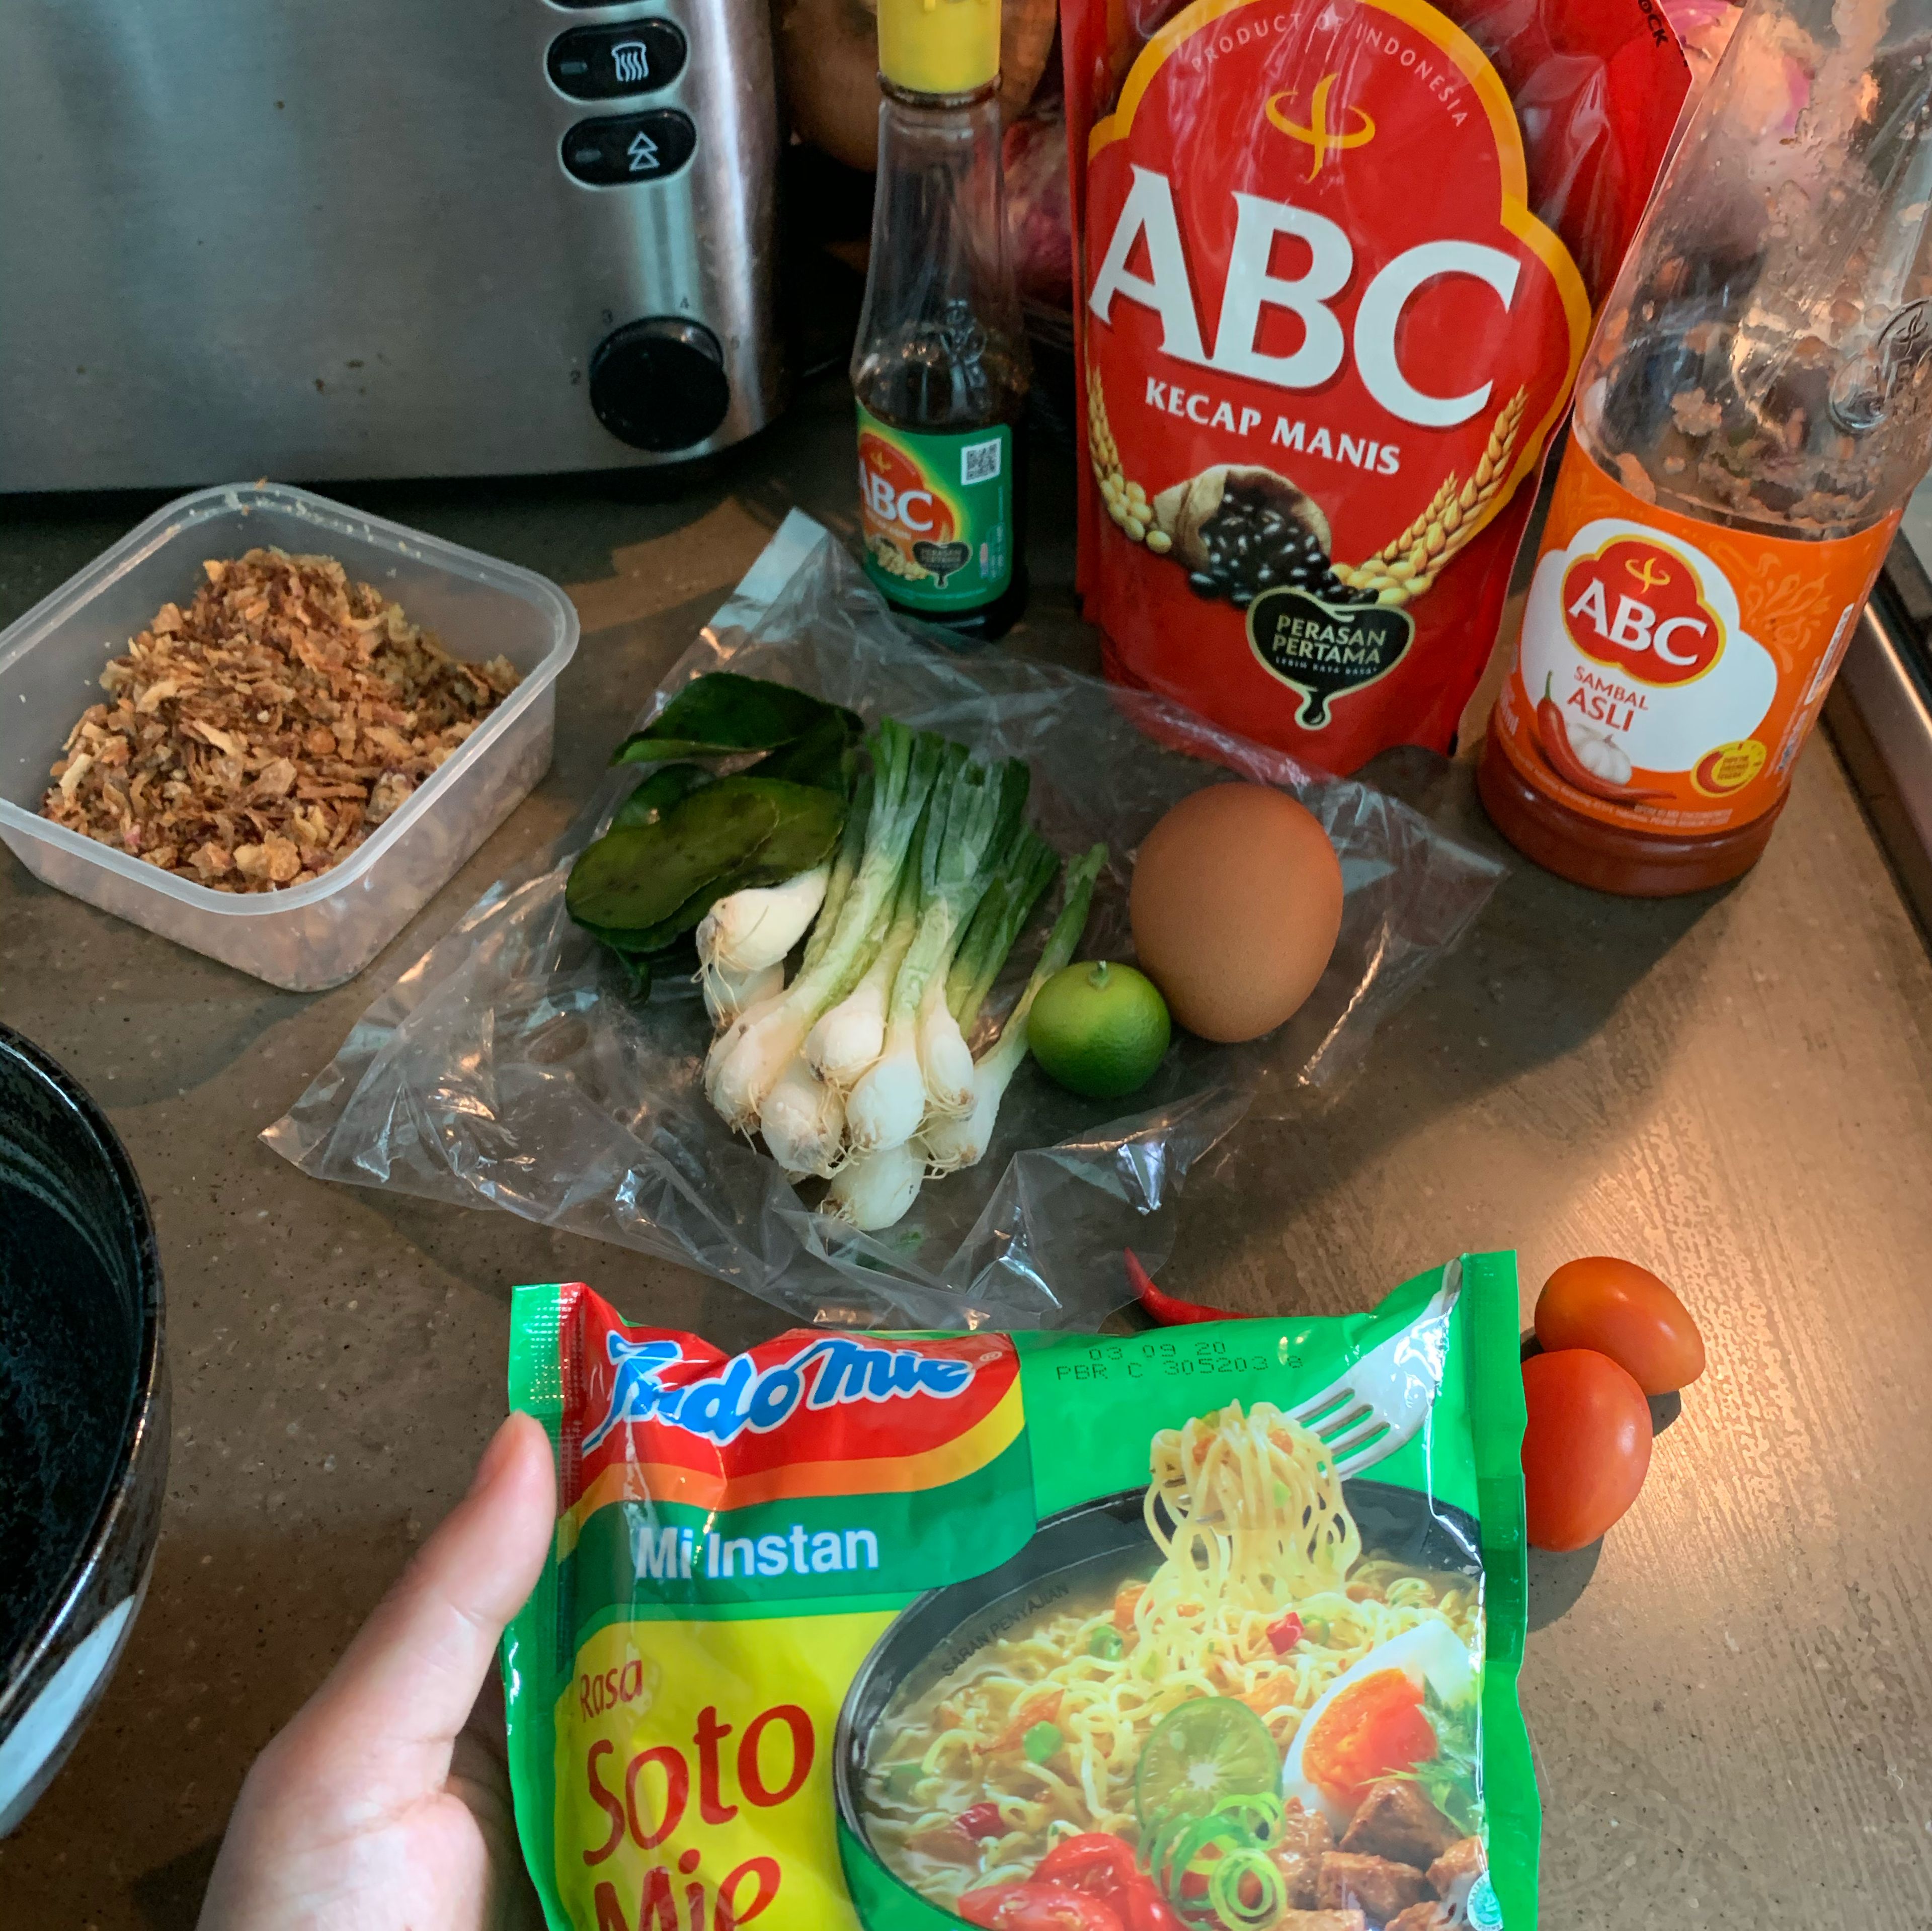 Prepare the ingredients. For the noodles, my favourite is Indomie Soto flavour. You can find this easily in Asian shop nearby. I found many of these abroad when I was traveling, even in Europe. You can substitute with any other instant noodles soup but the taste would be different.